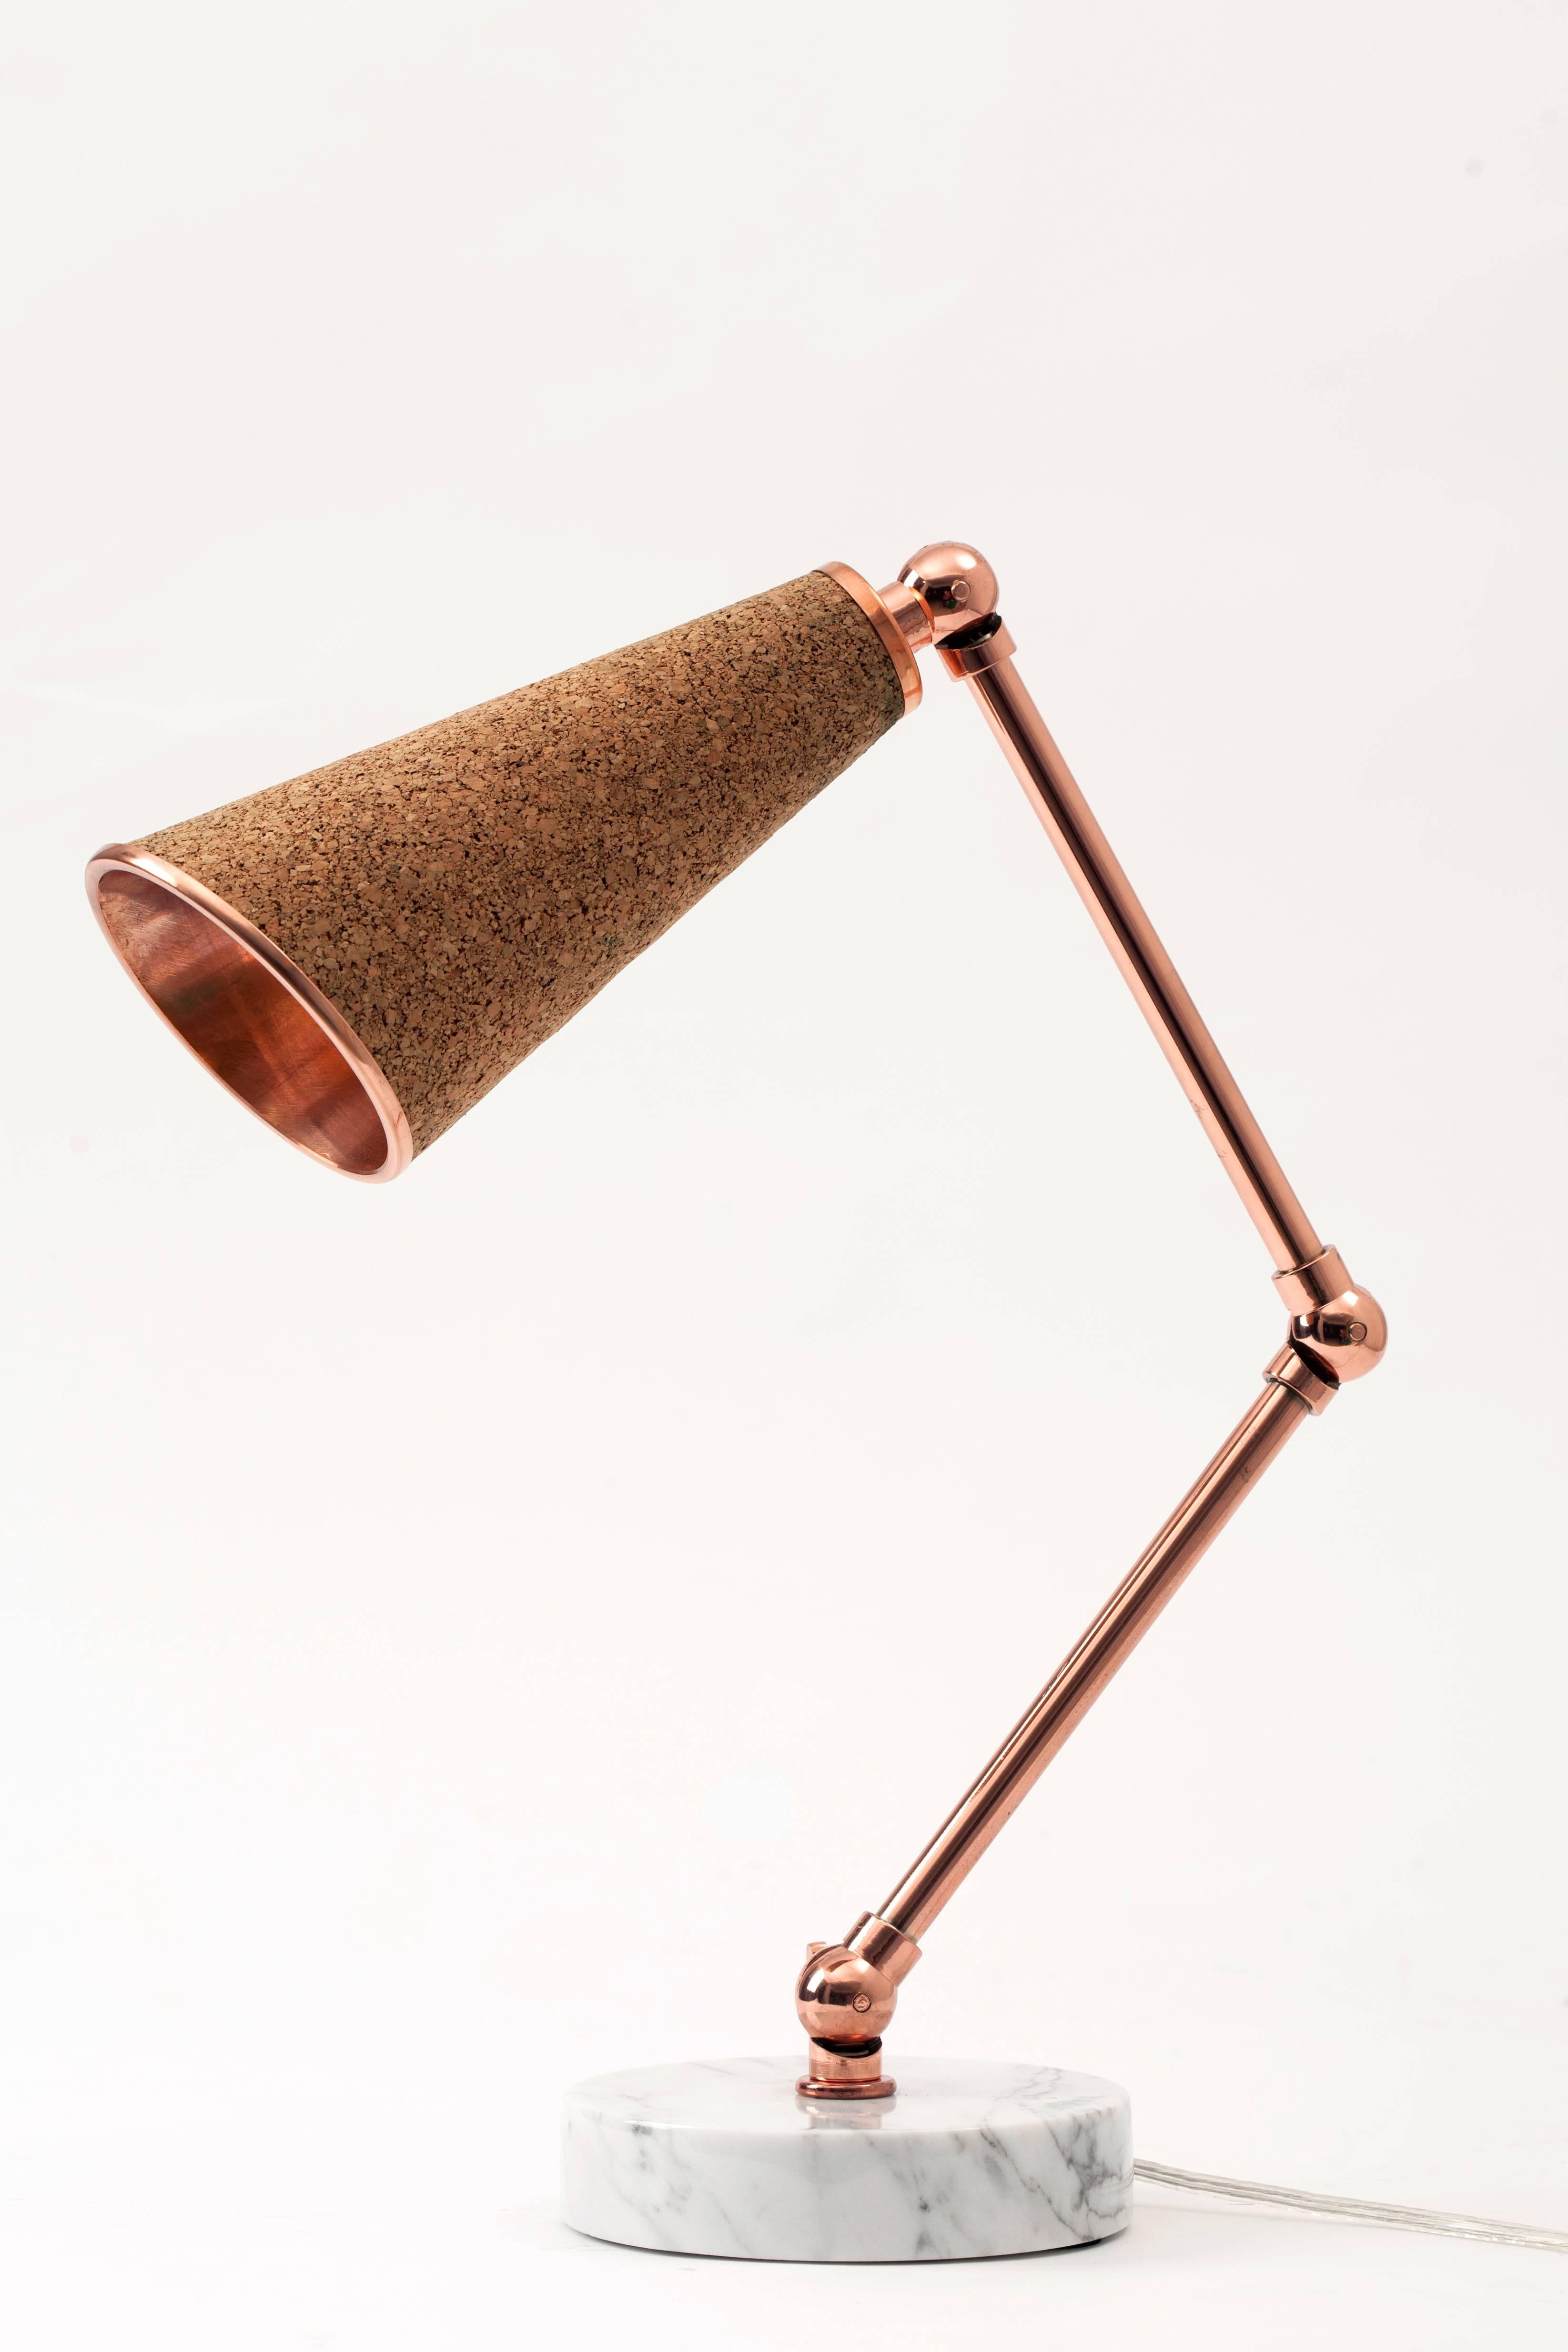 Modern Lanterna Table Lamp in Carrara Marble, Cork and Copper with Adjustable Arms  For Sale